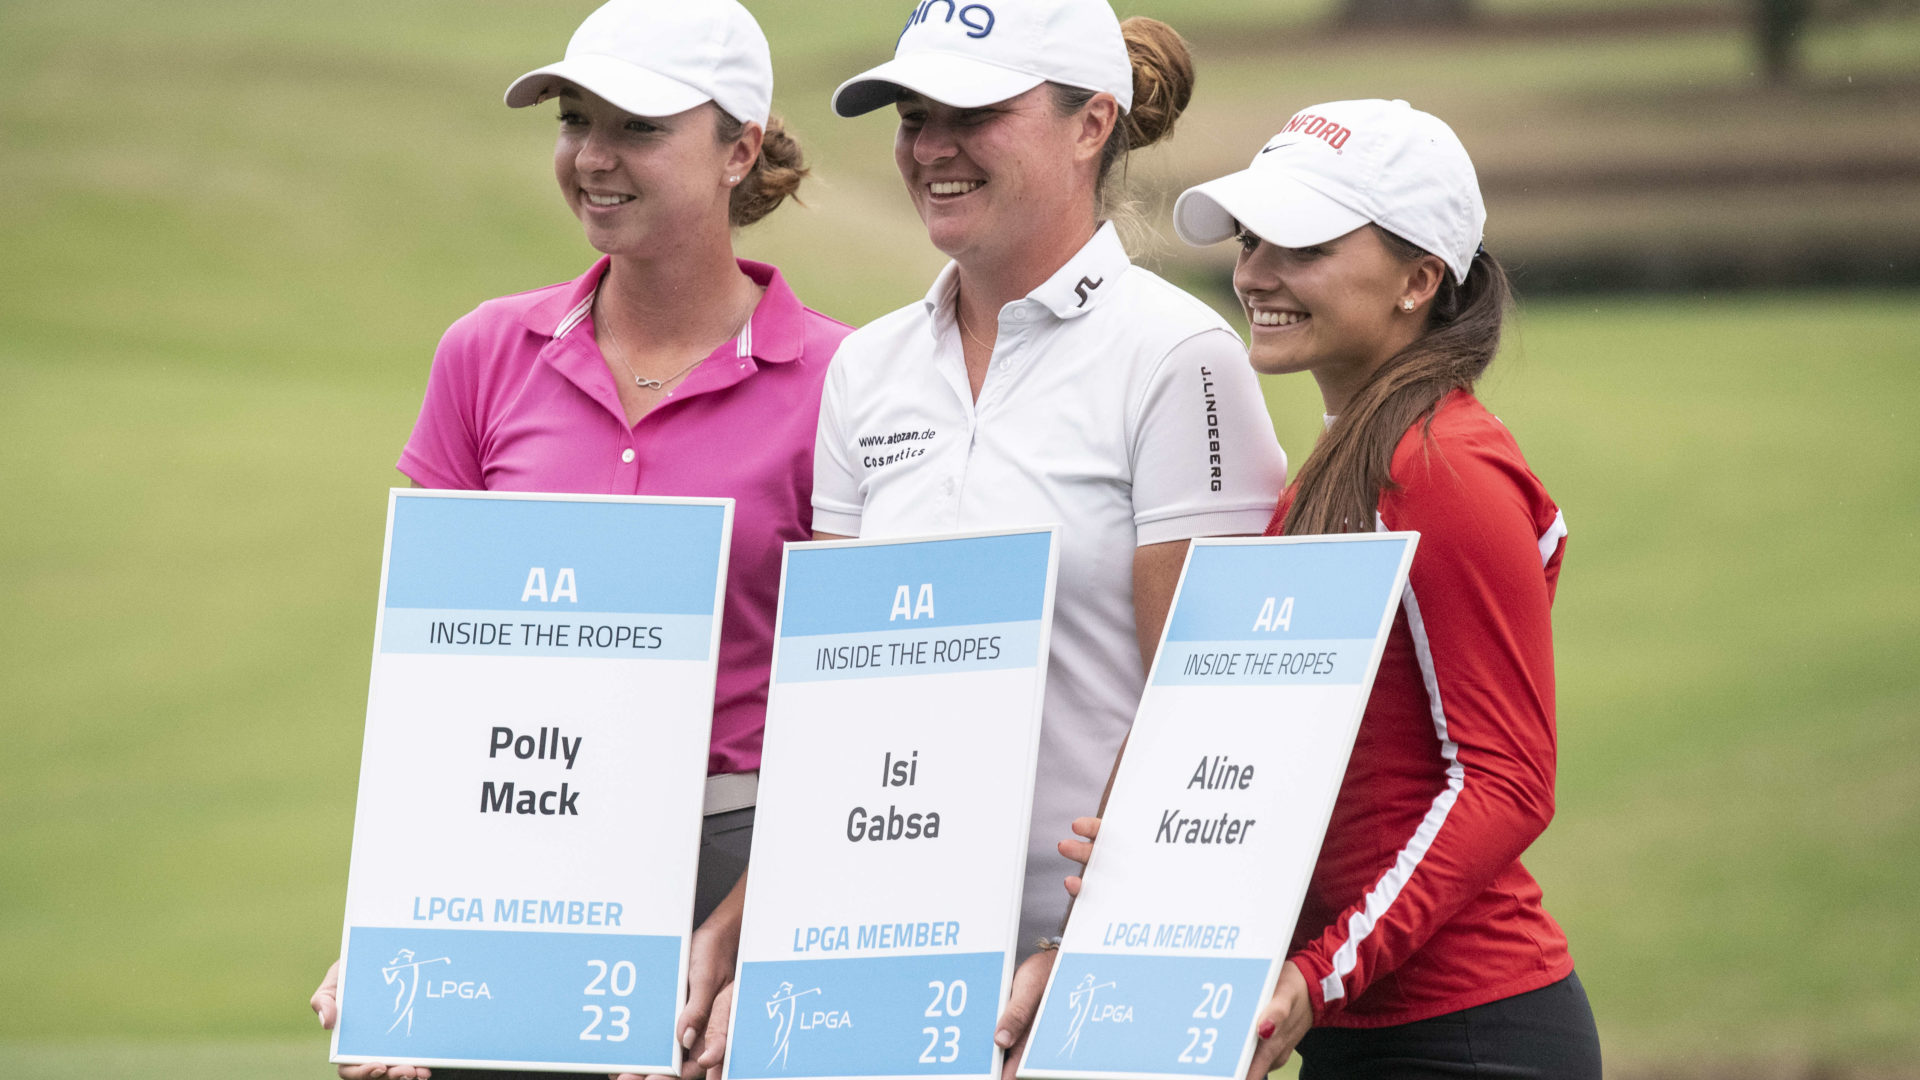 DOTHAN, AL - DECEMBER 11: Polly Mack, Isi Gabsa and Aline Krauter of Germany pose with their tour cards after the final round of the 2022 LPGA Q-Series - Dothan at Highland Oaks Golf Course on December 11, 2022 in Dothan, Alabama. tour news (Photo by Hannah Ruhoff/Getty Images)